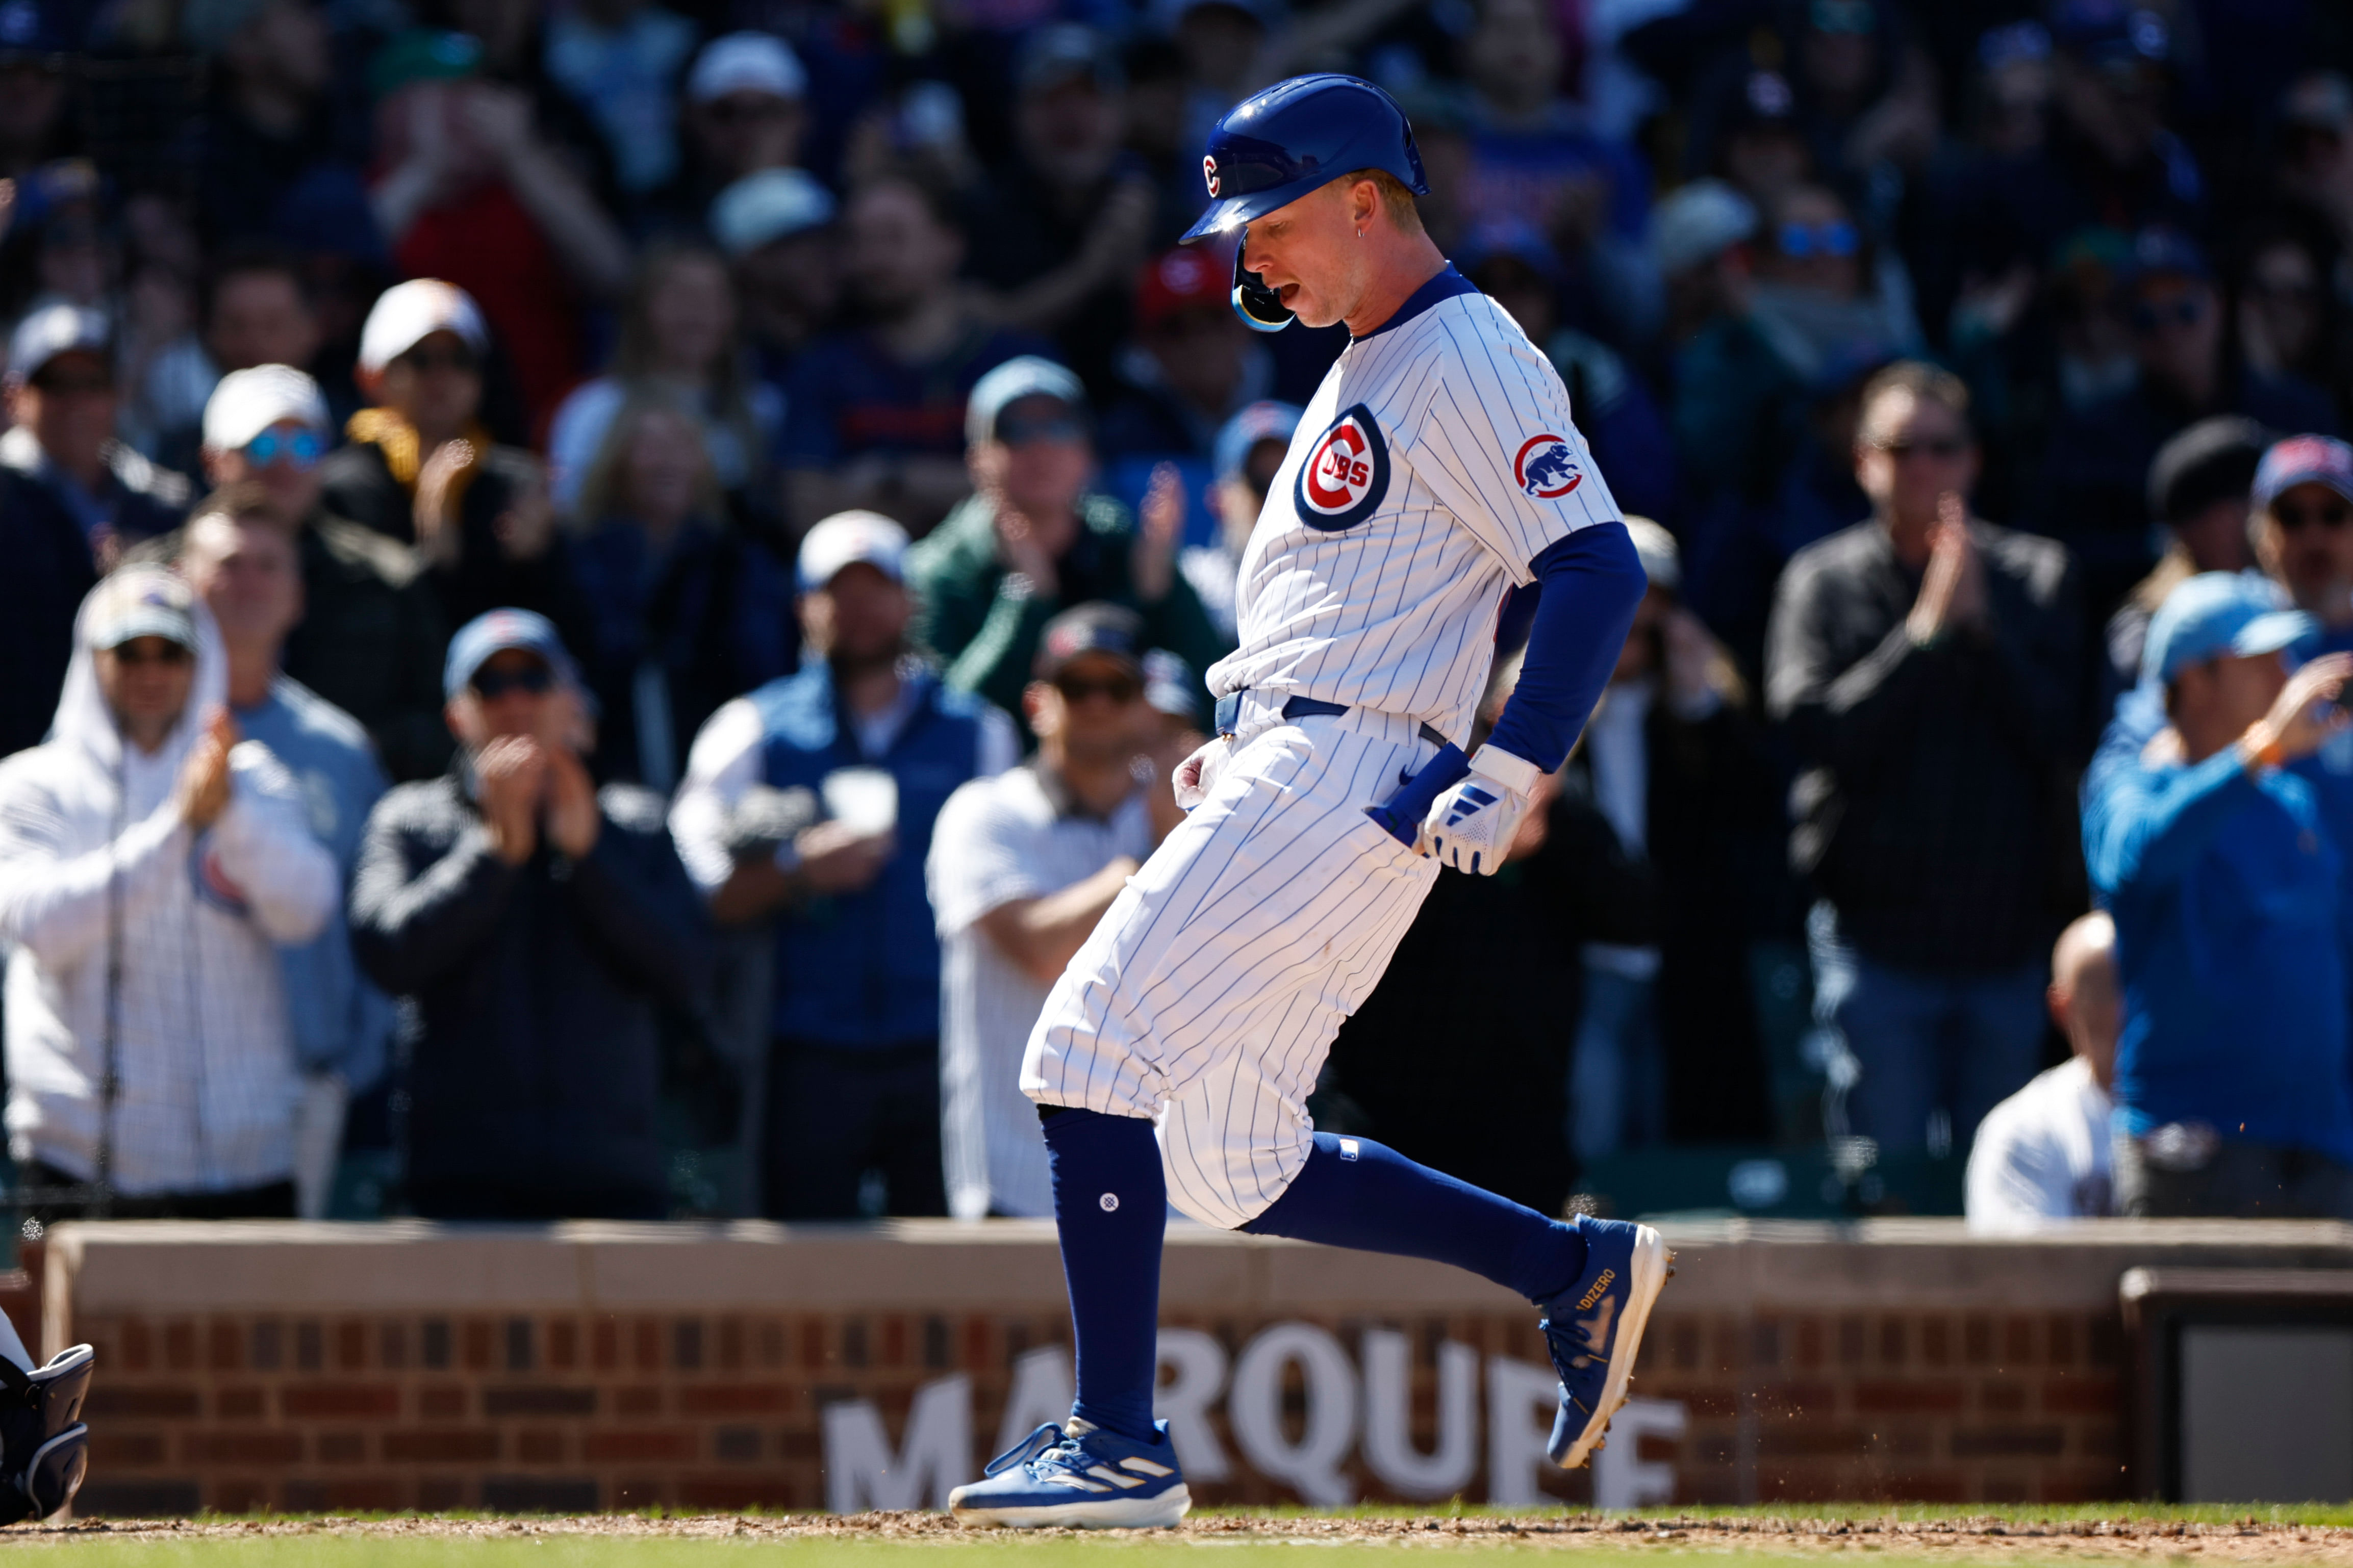 Chicago Cubs - Pete Crow-Armstrong (Image via USA Today)